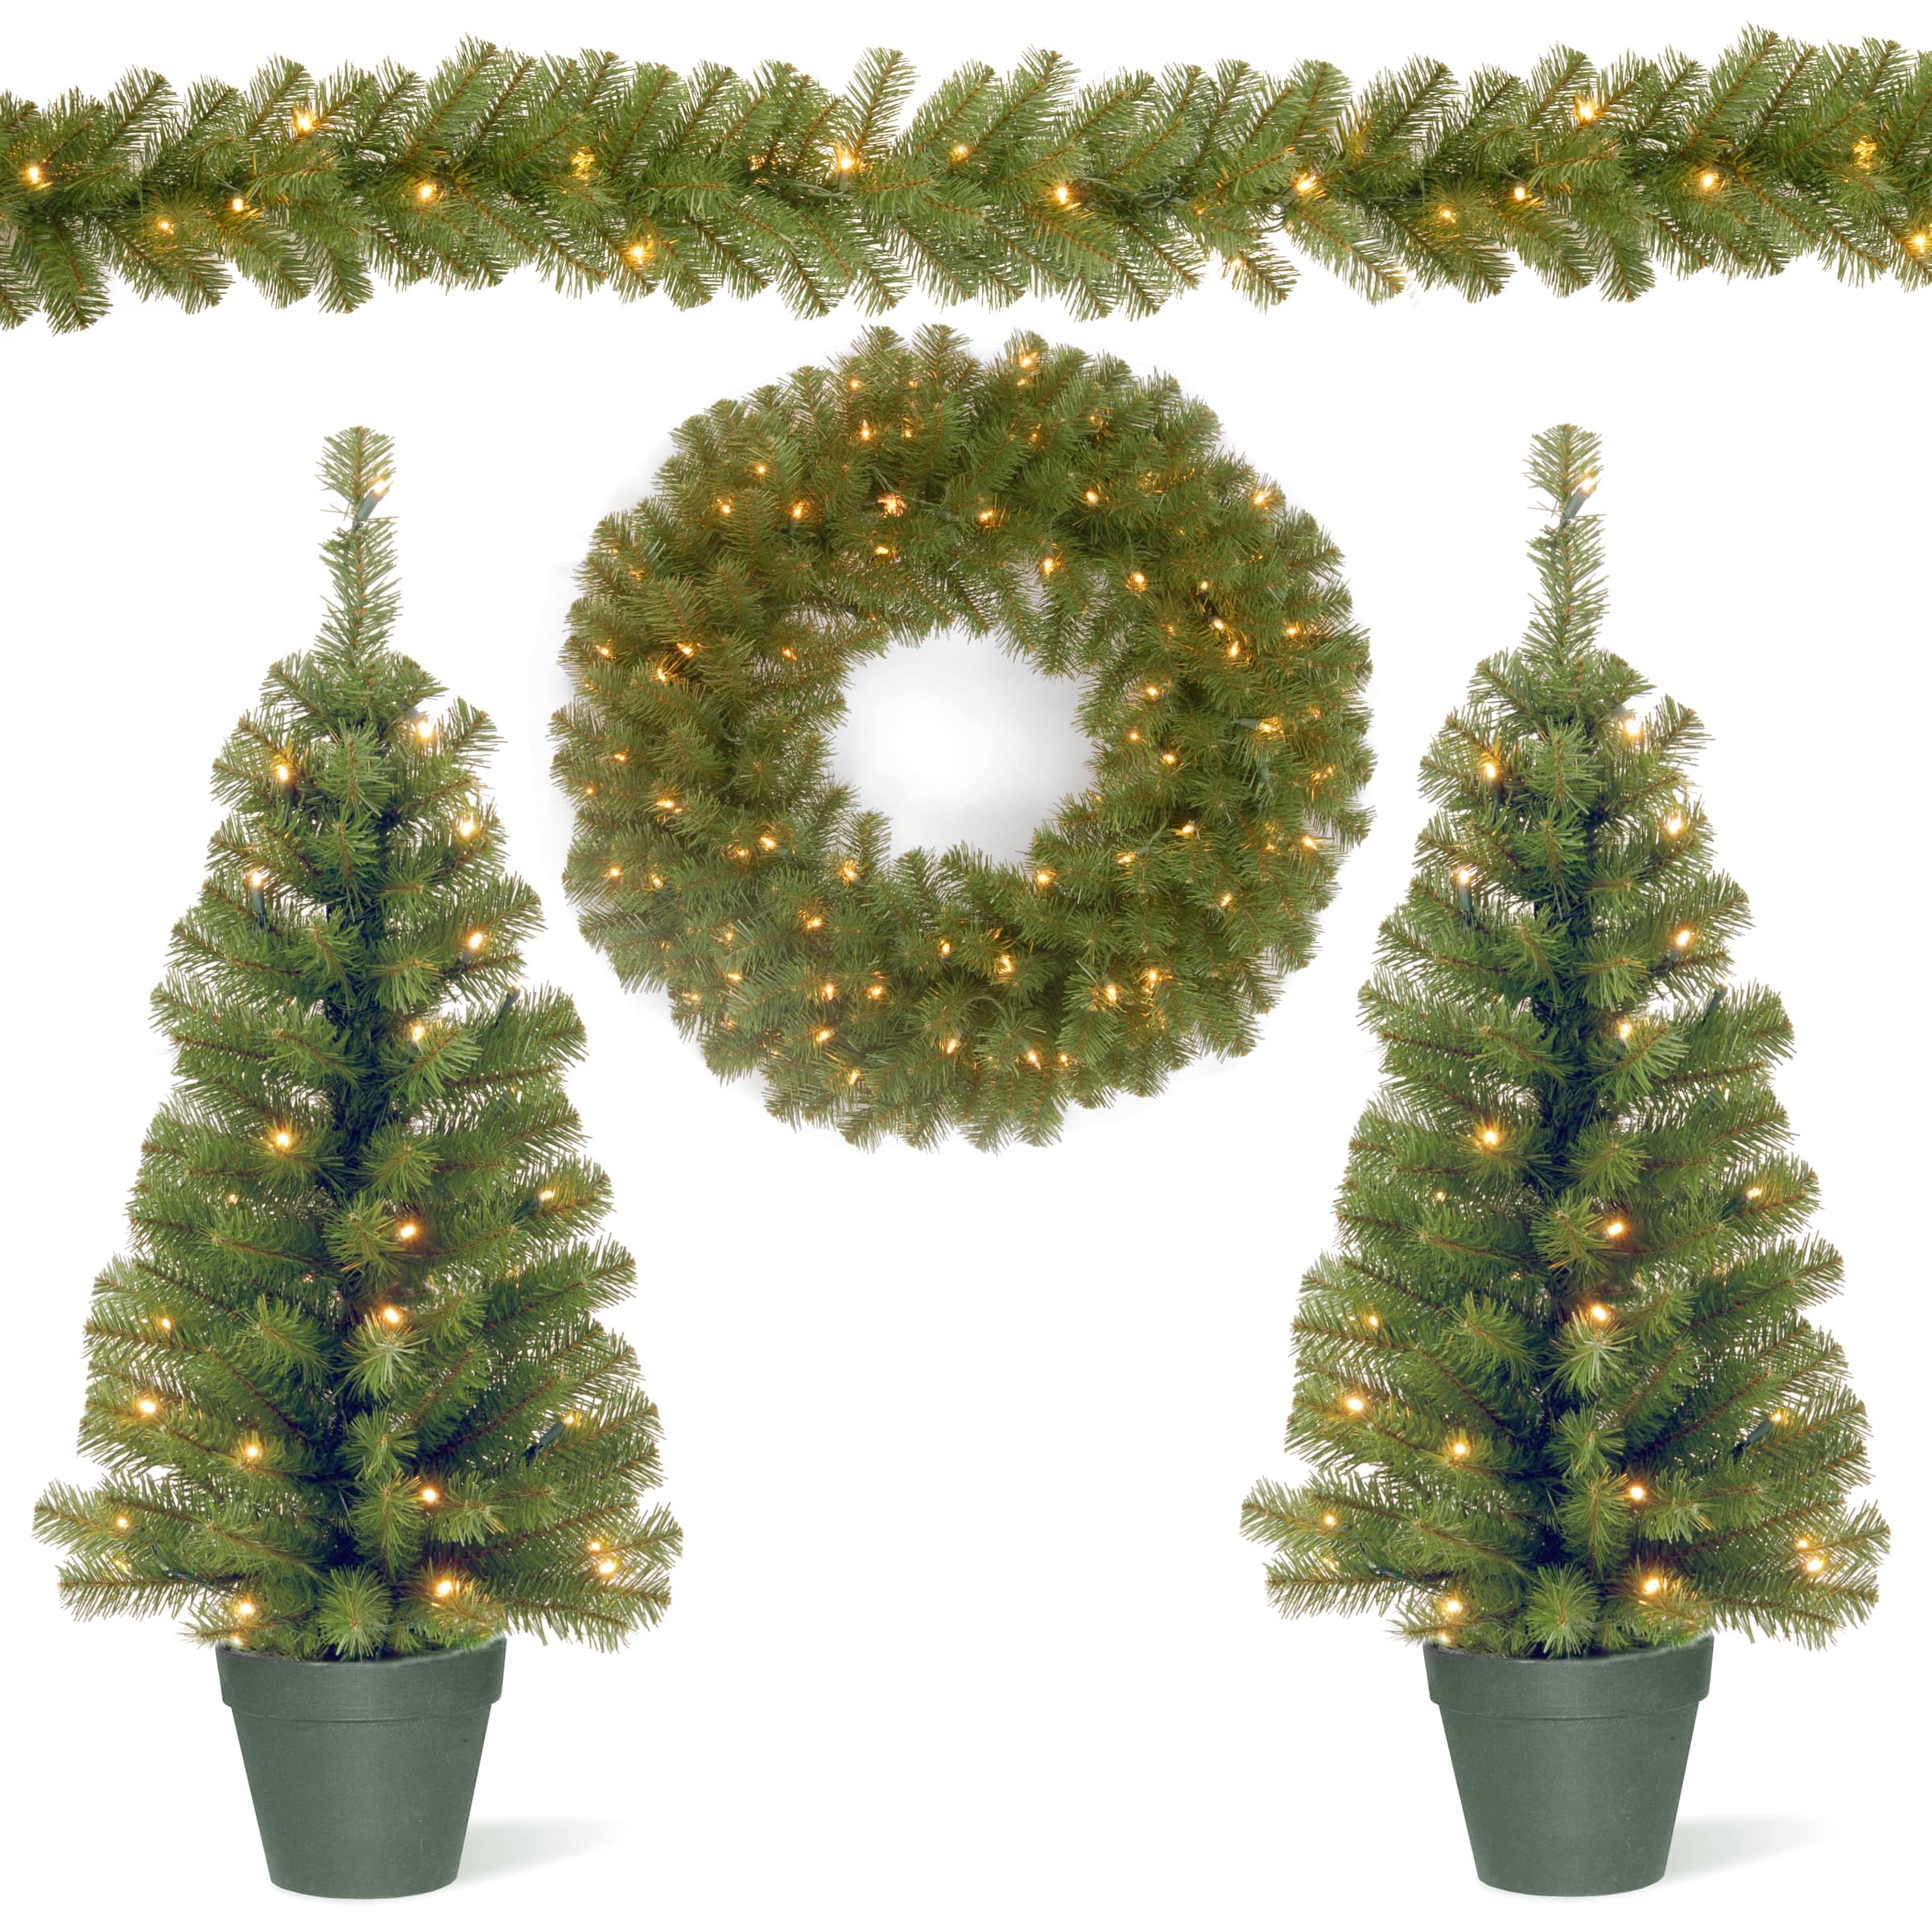 Details about   6.8ft/2m 20 Led Christmas Decor Tree wreath Copper wire Lights Garland Pine Cone